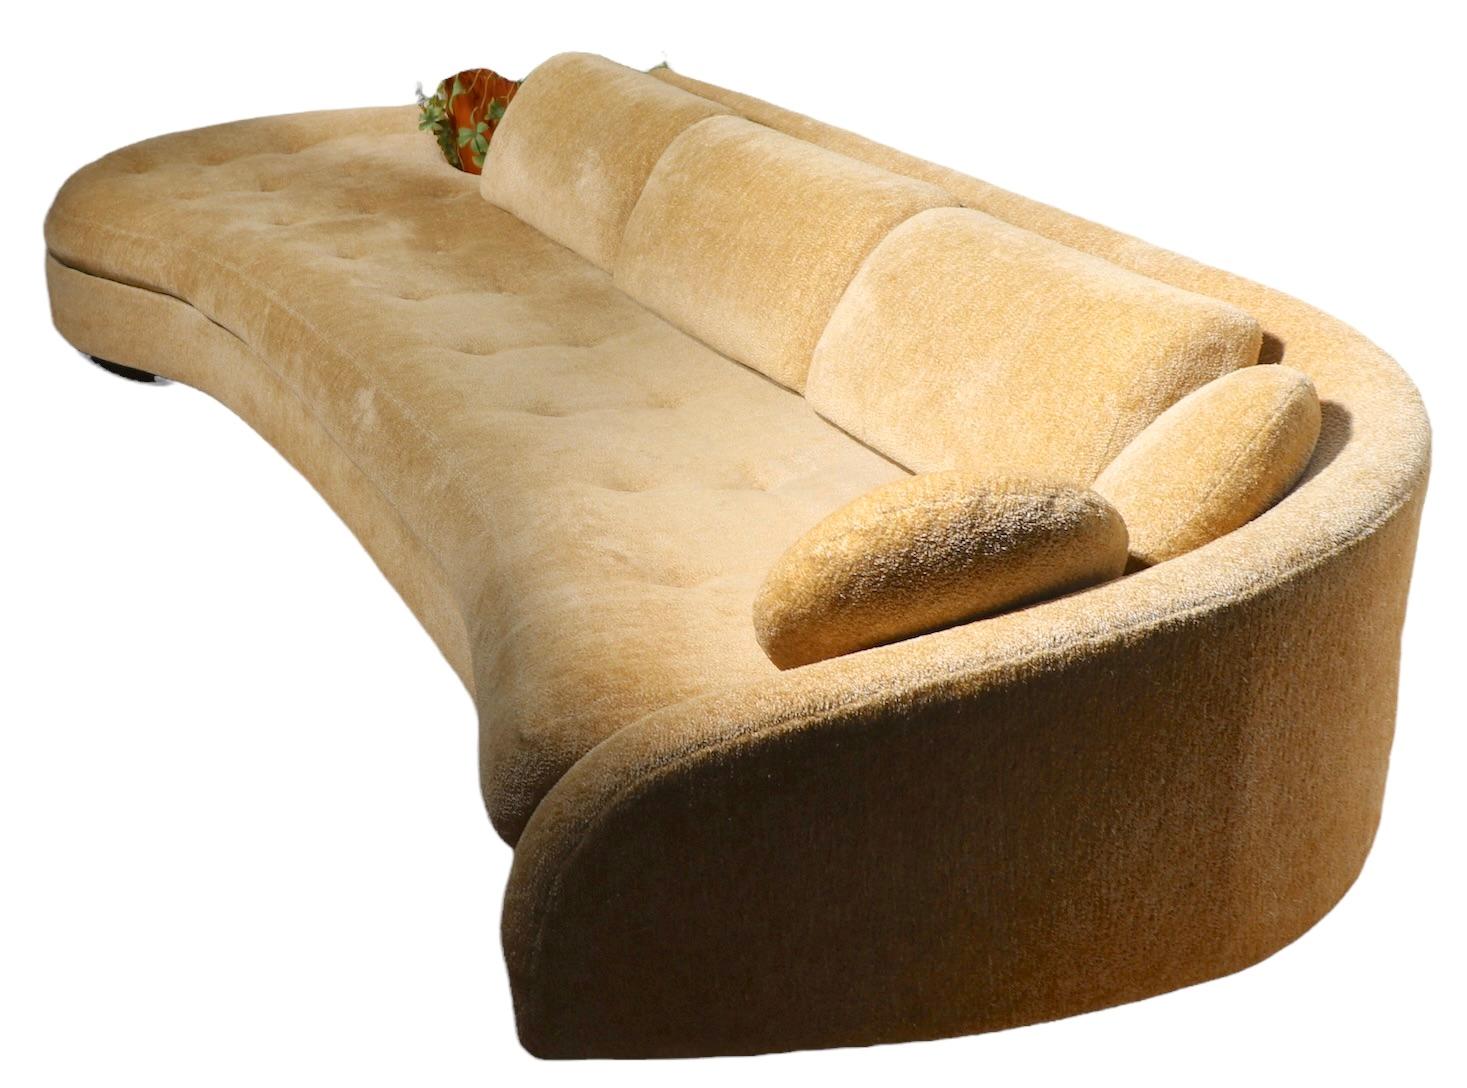 20th Century Adrian Pearsall Cloud Sofa in Excellent Original Condition, ca. 1960’s For Sale